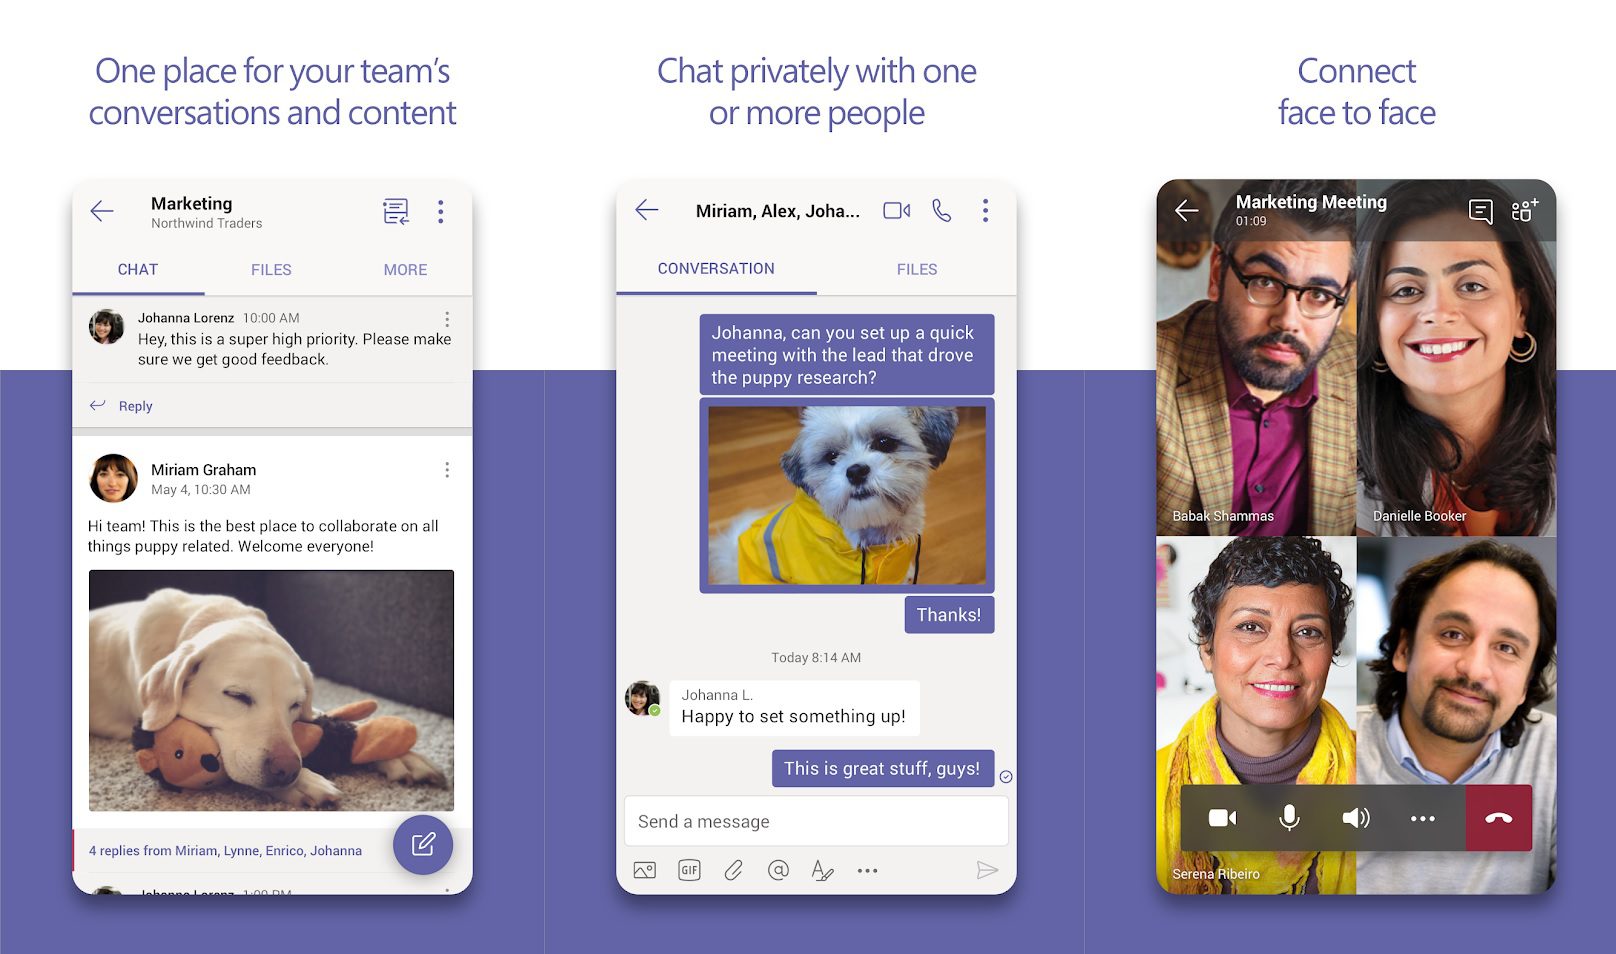 Offline file access coming to Microsoft Teams for Android